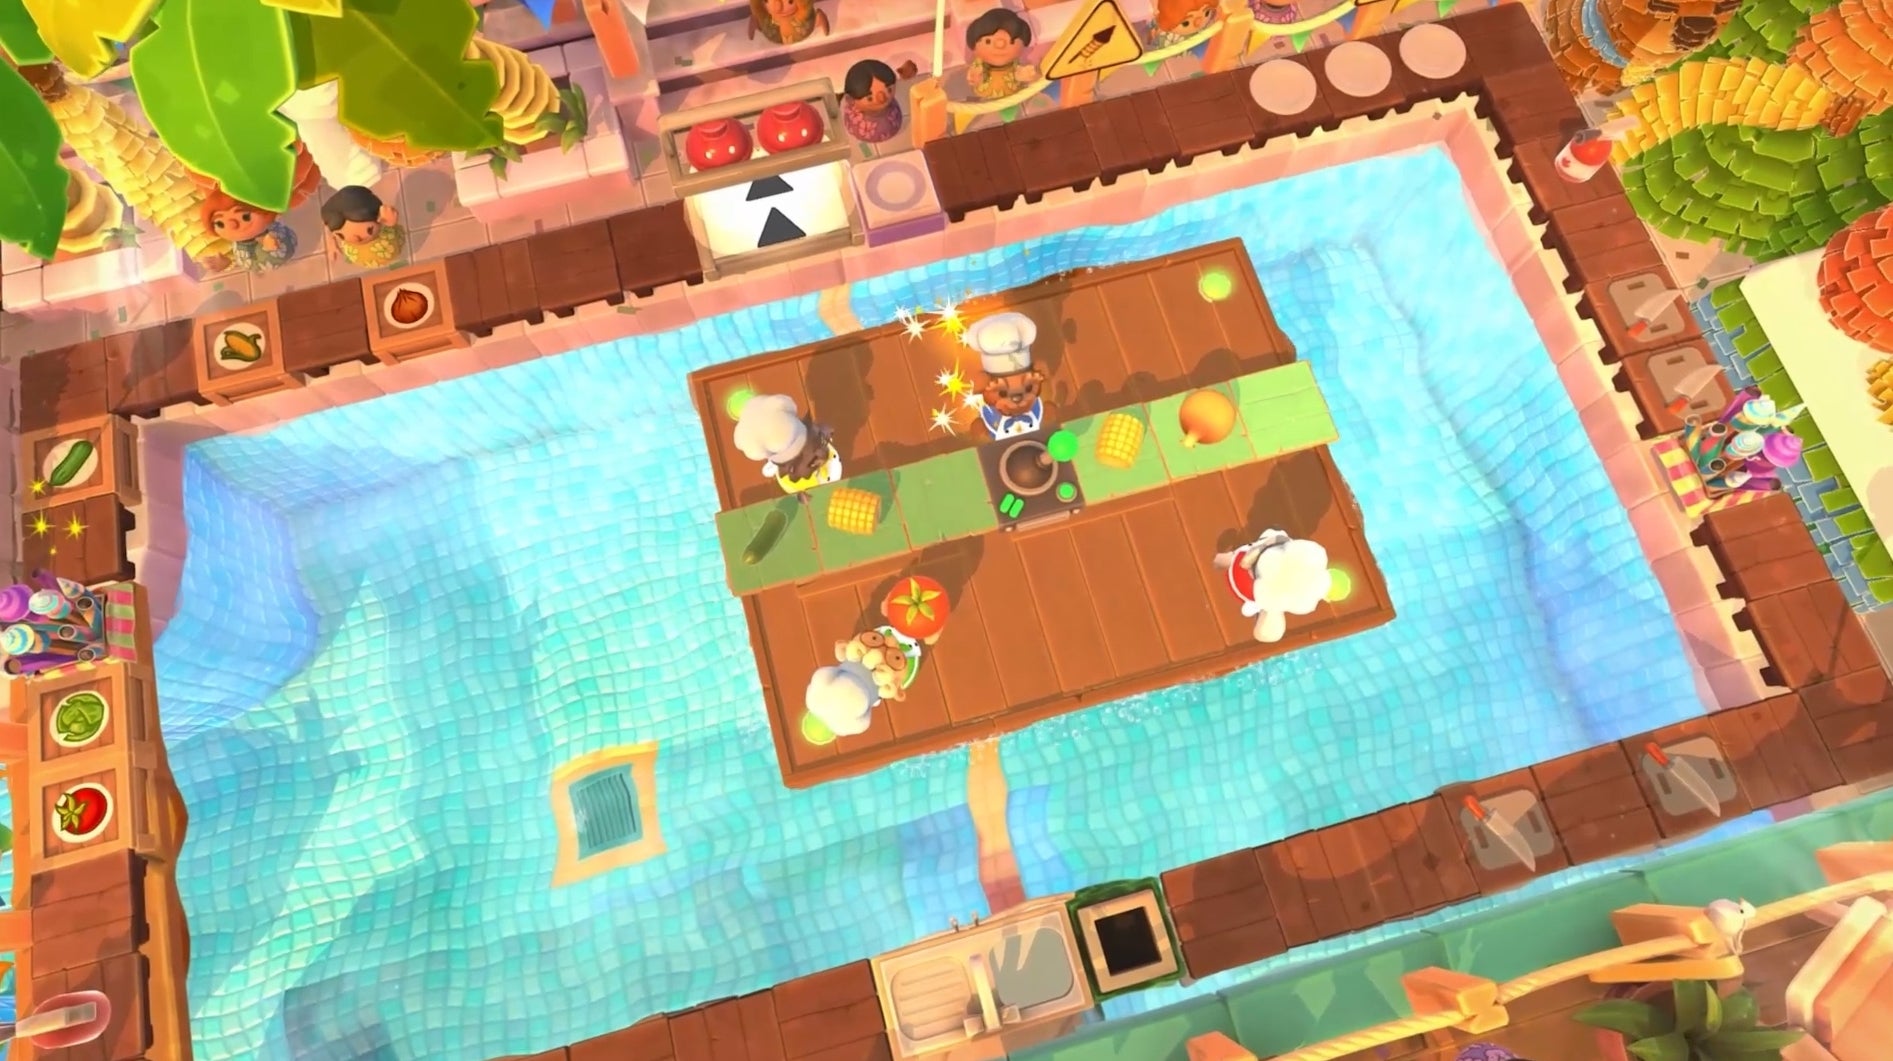 Image for Overcooked 2's next DLC, Sun's Out Buns Out, is free and out later this month